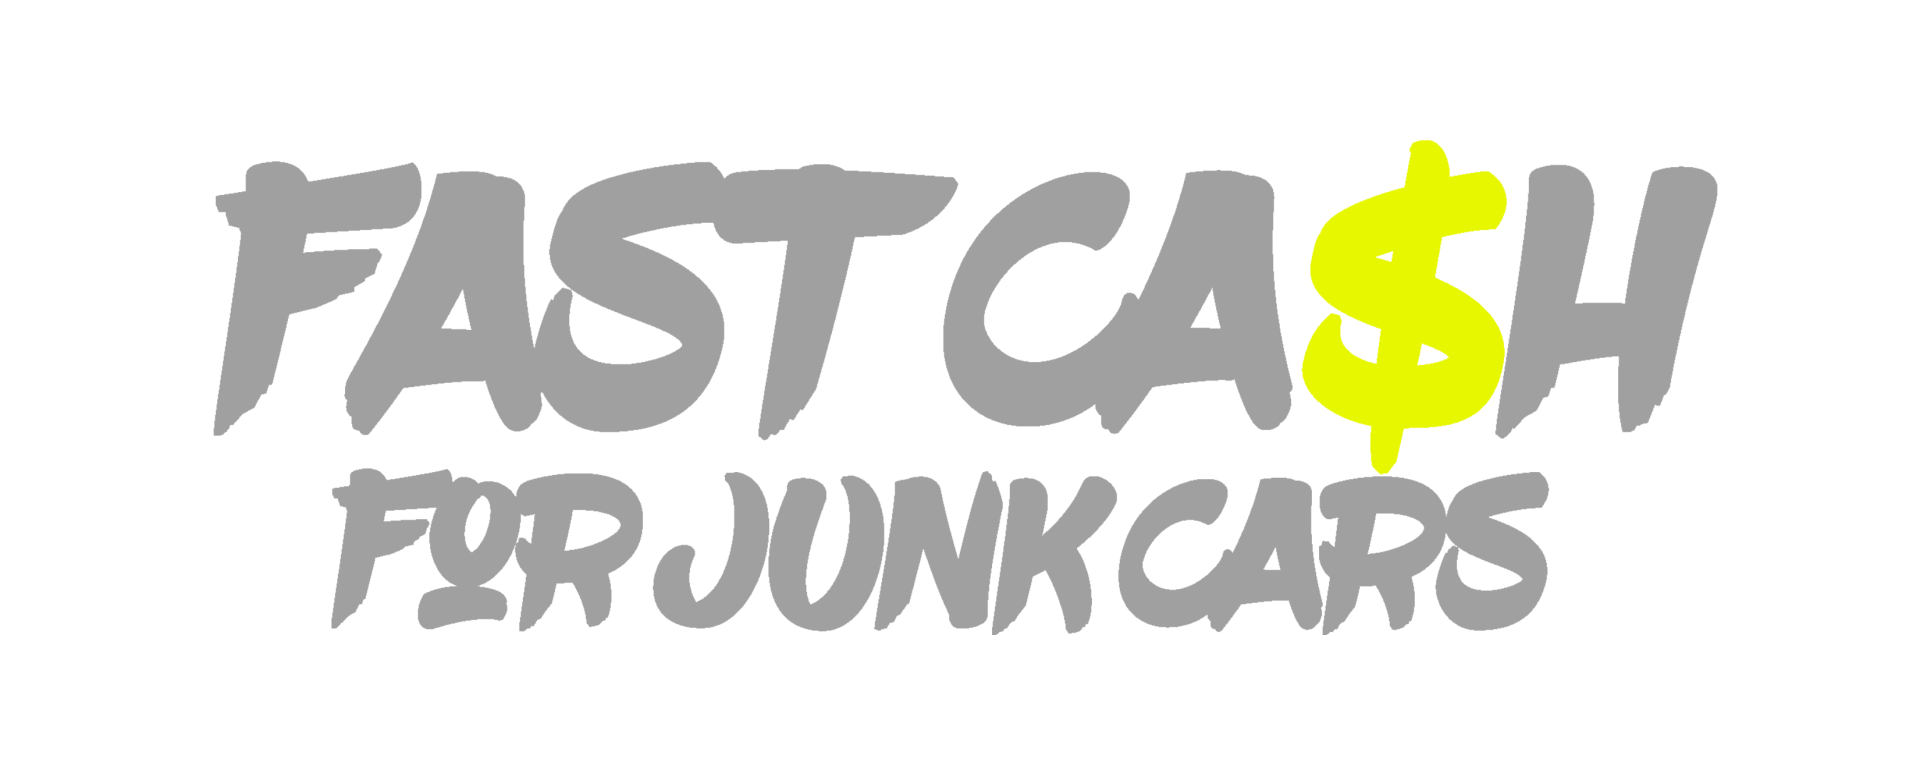 Fast Cash For Junk Cars